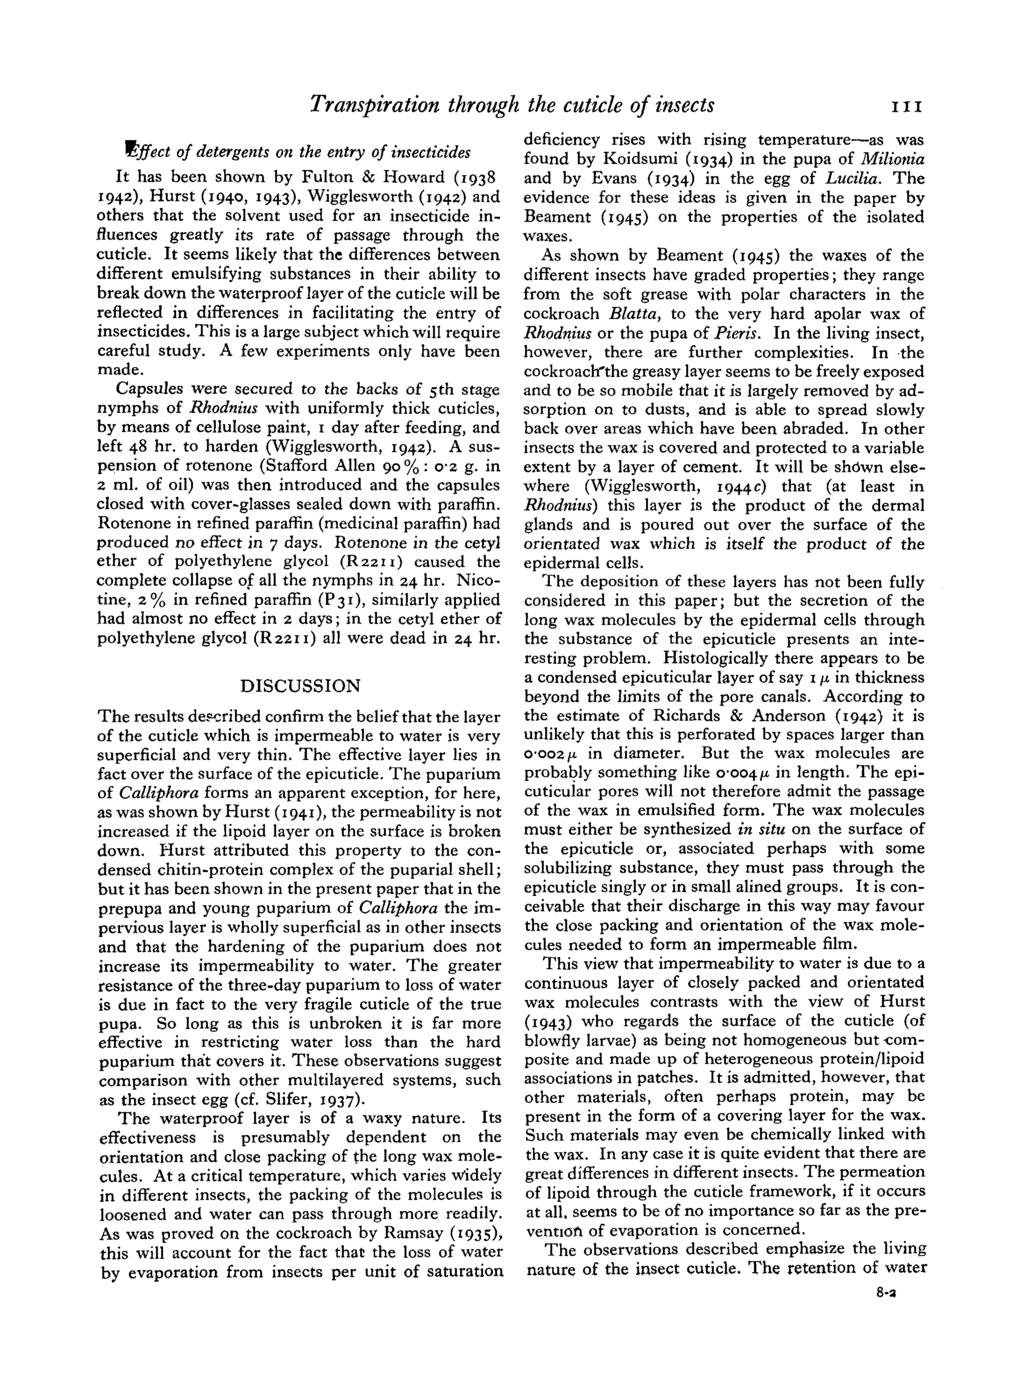 Effect of detergents on the entry of insecticides It has been shown by Fulton & Howard (1938 1942), Hurst (1940, 1943), Wigglesworth (1942) and others that the solvent used for an insecticide